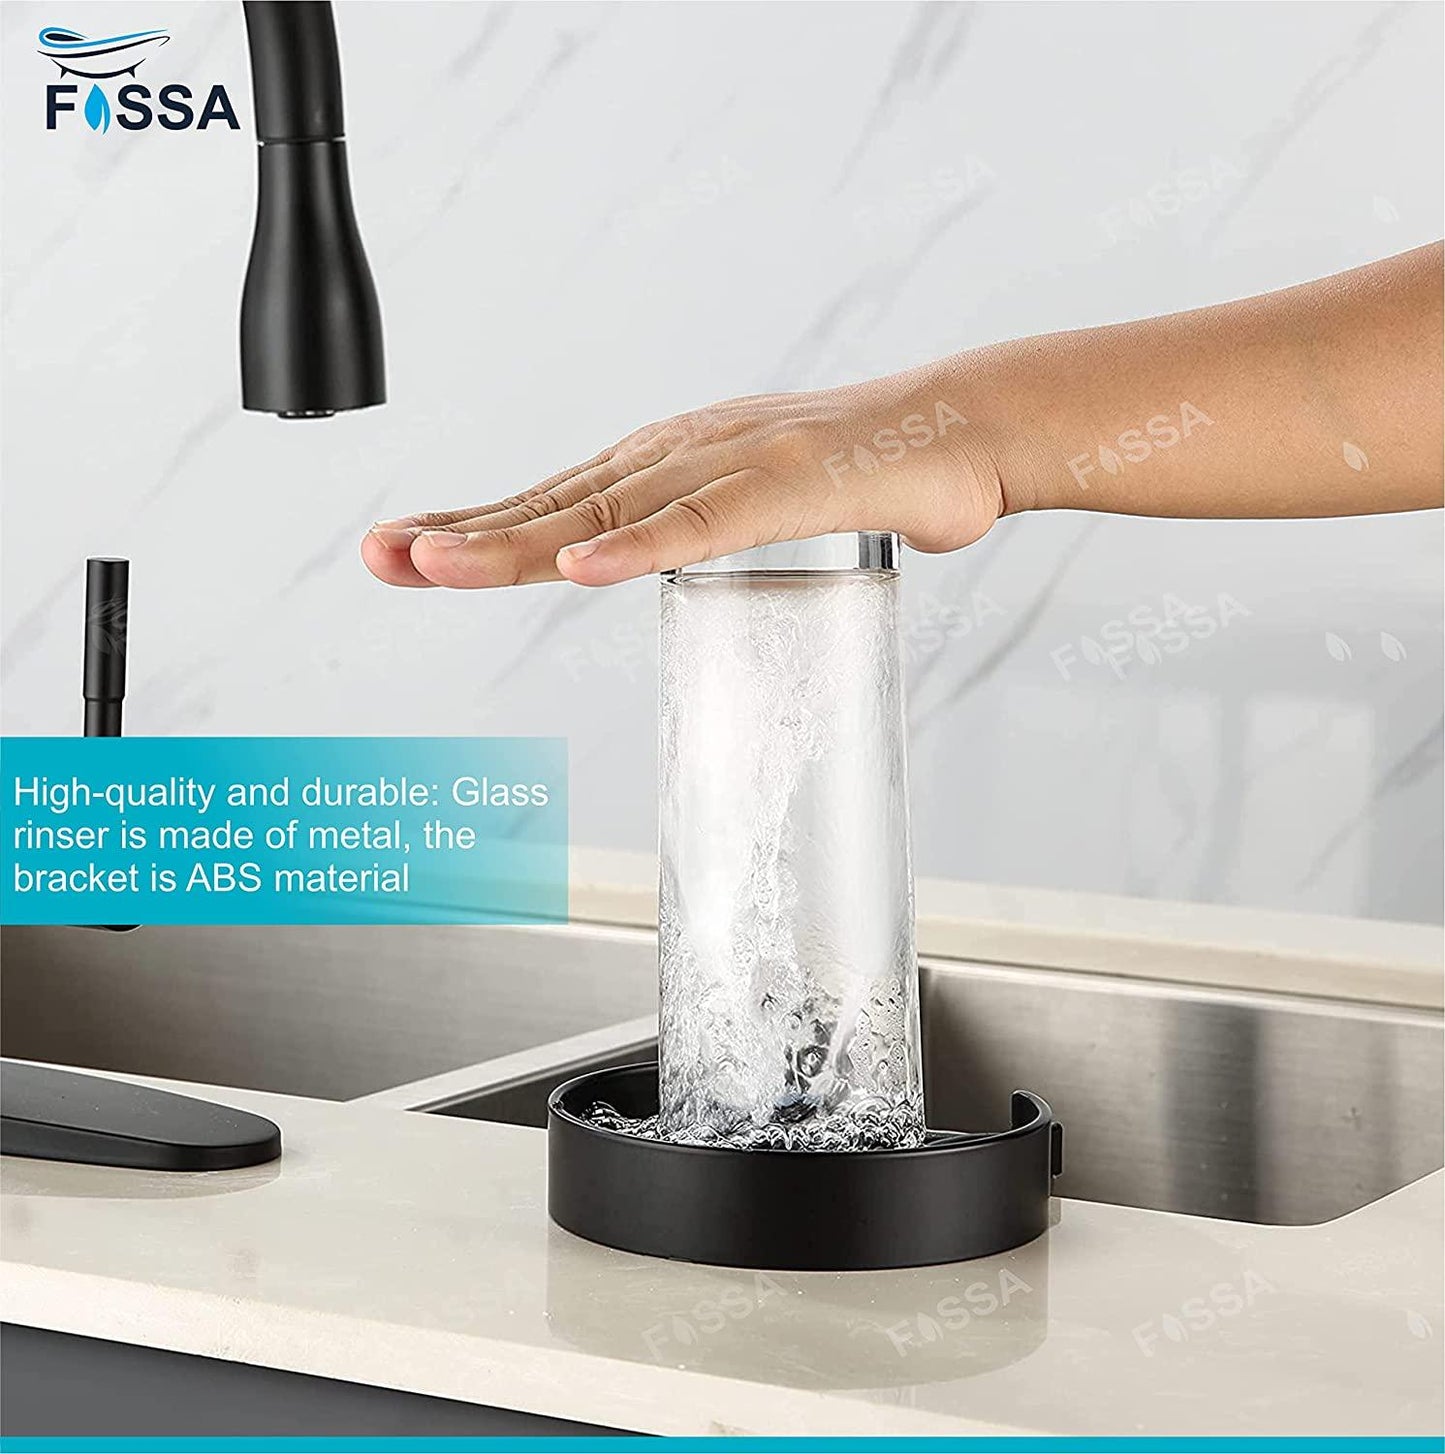 FOSSA Faucet | Glass Rinser for Kitchen Sink, Glass Cleaner for Home Bar| Glass Sink Sprayer | Polished Chrome | - Fossa Home 